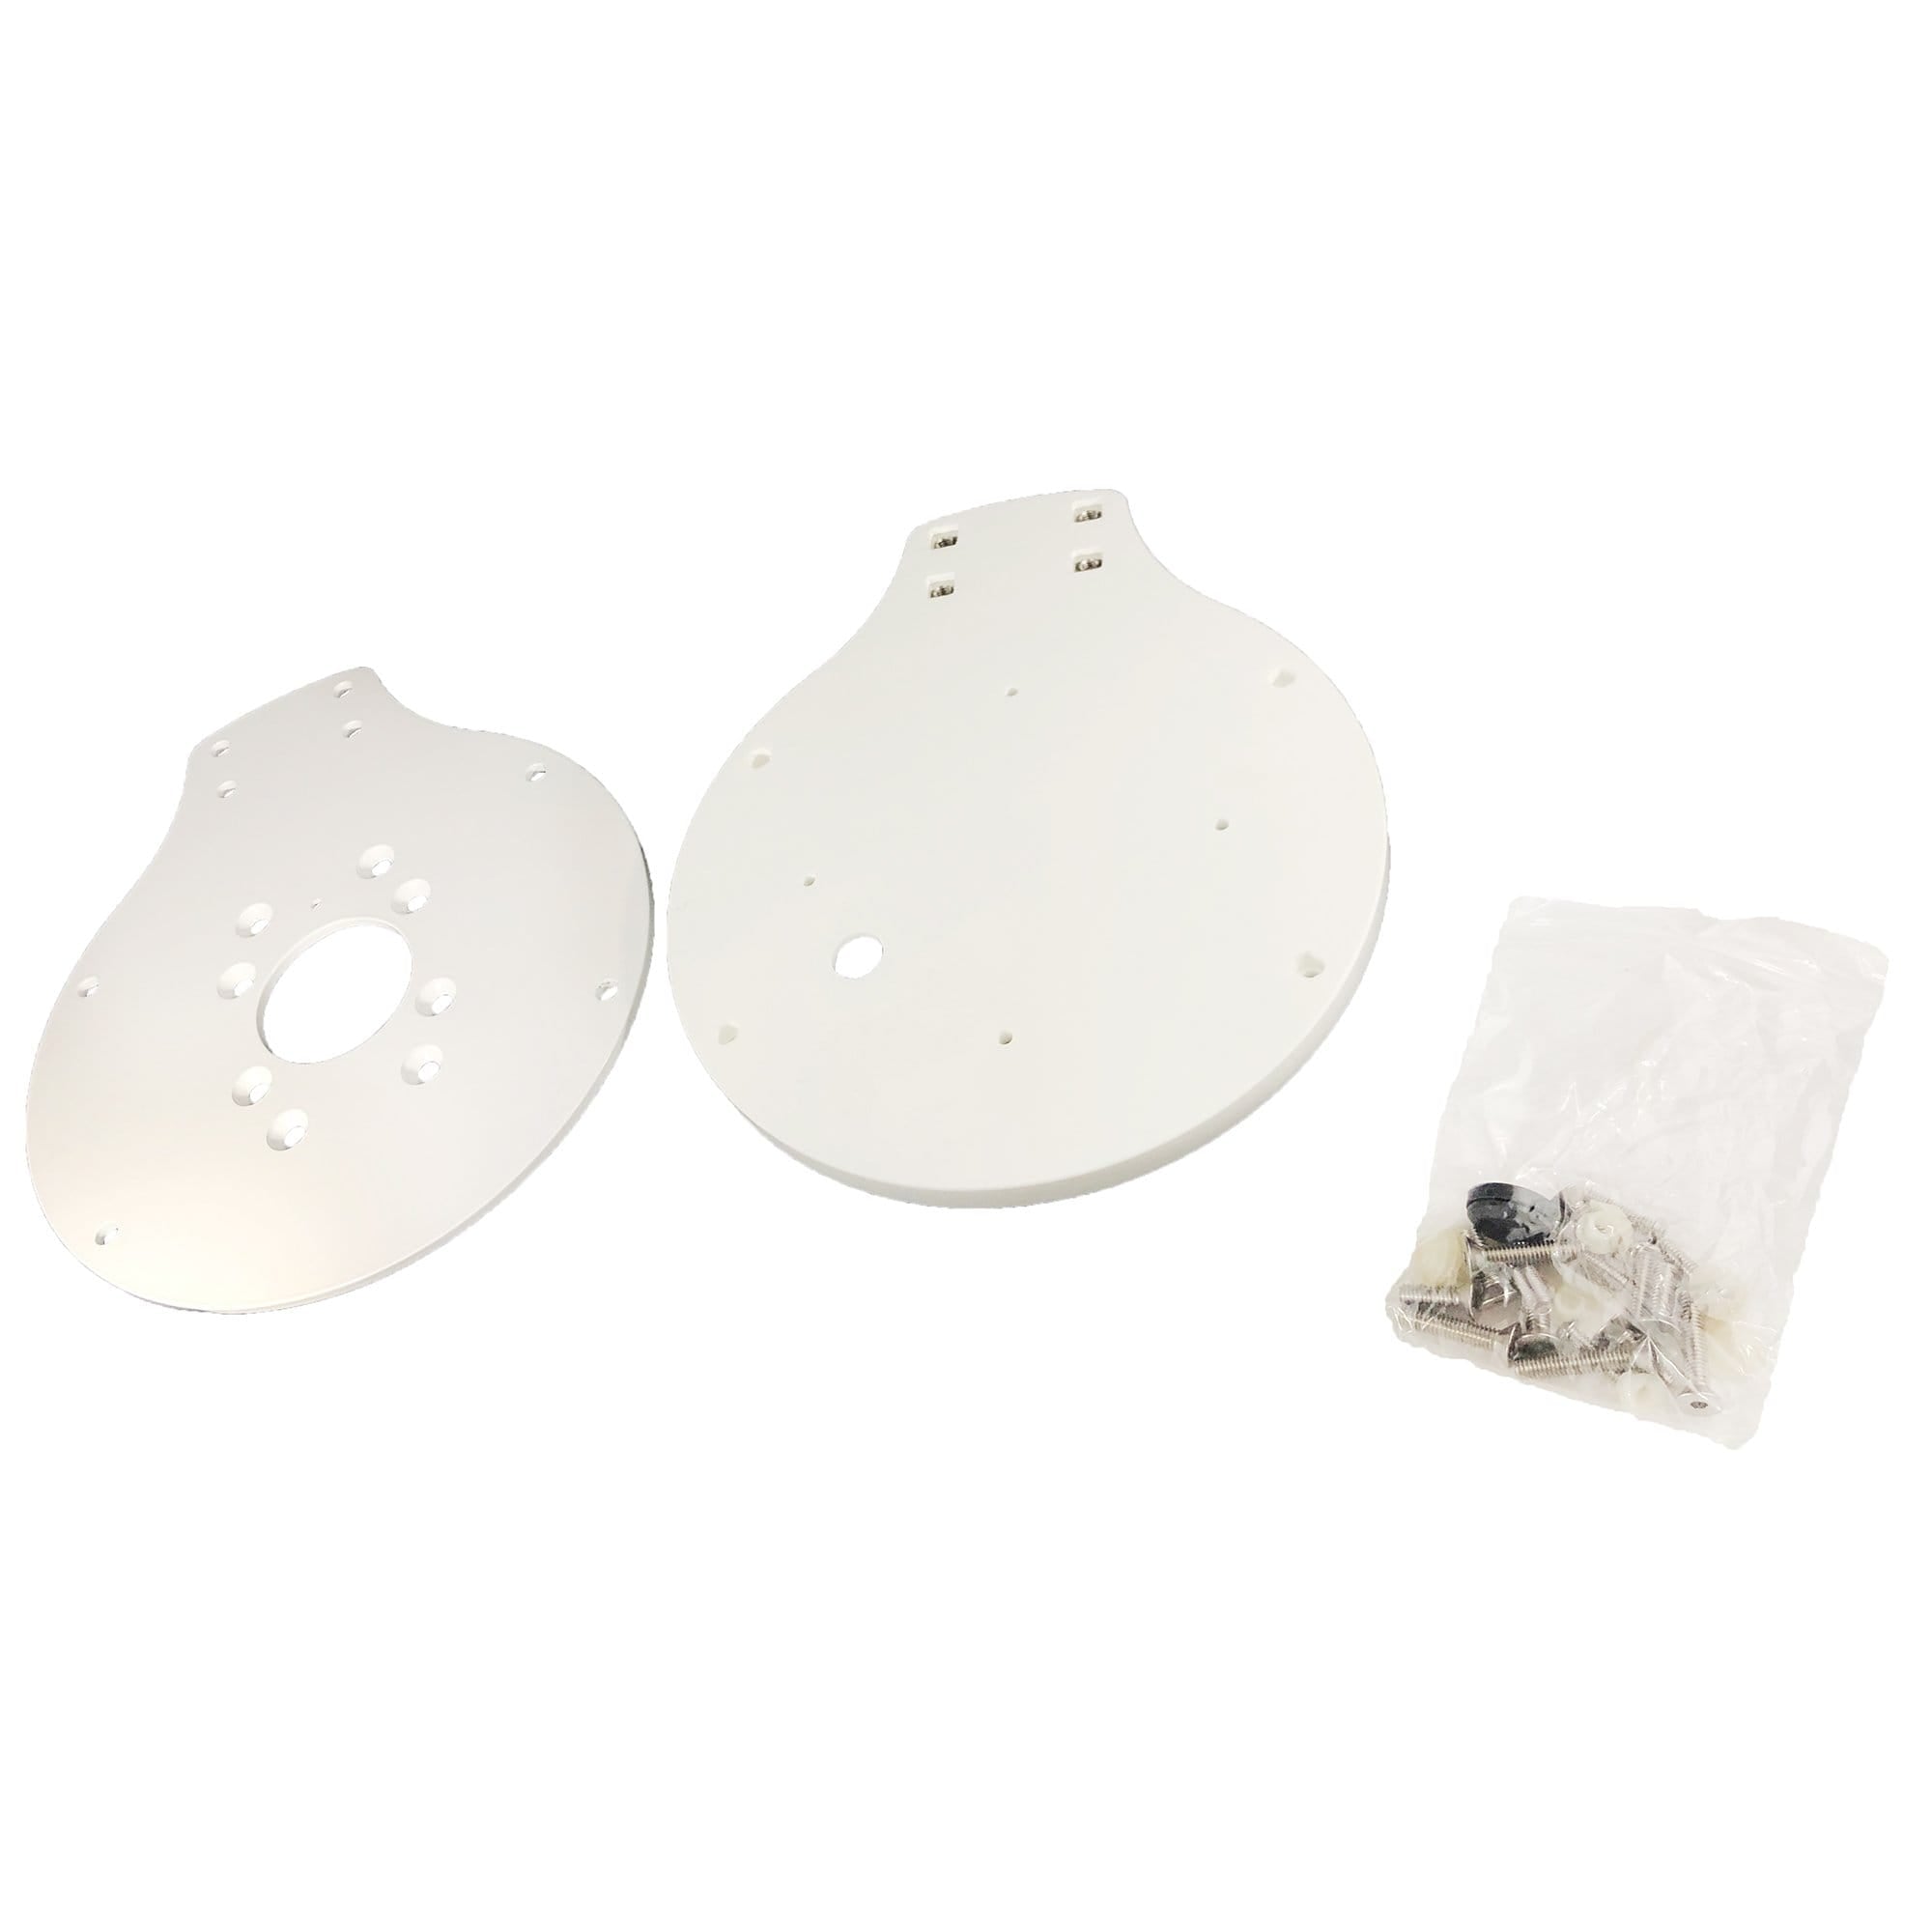 Seaview ADAS4 Modular Plate (Starboard) For All Fb 150 & Fb 250 Domes